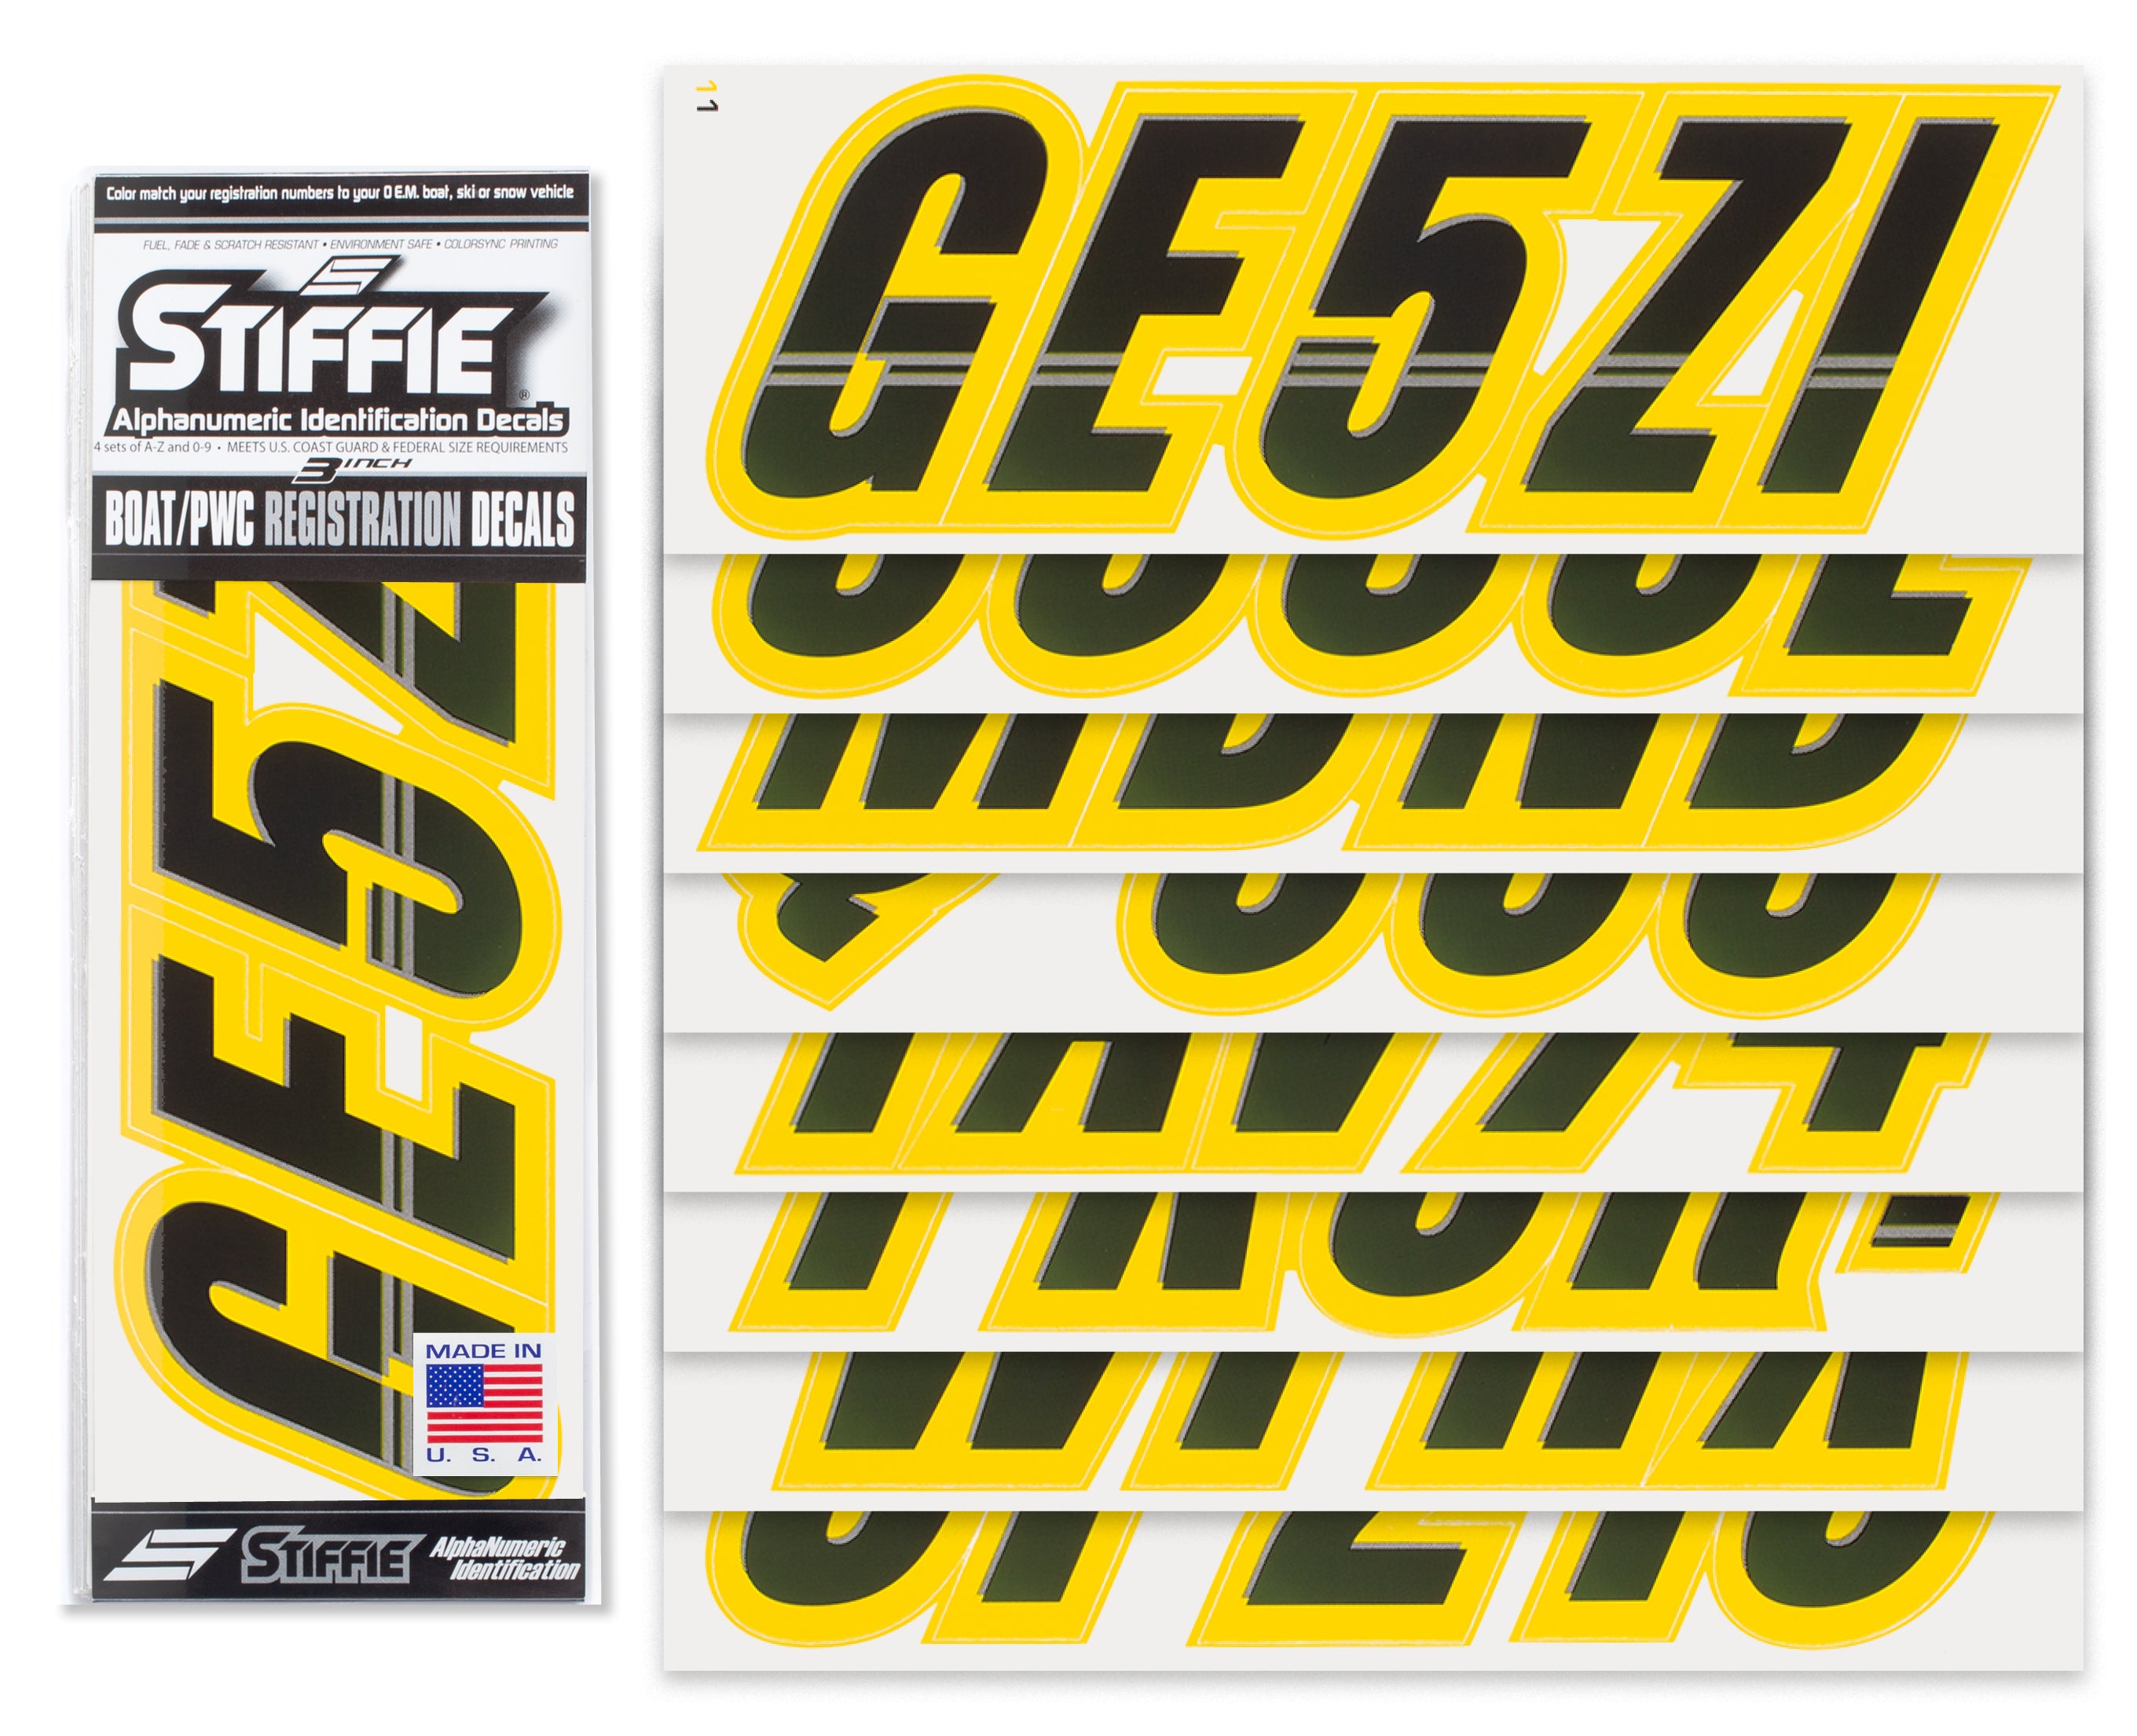 Stiffie Techtron Black/Yellow 3" Alpha-Numeric Registration Identification Numbers Stickers Decals for Boats & Personal Watercraft